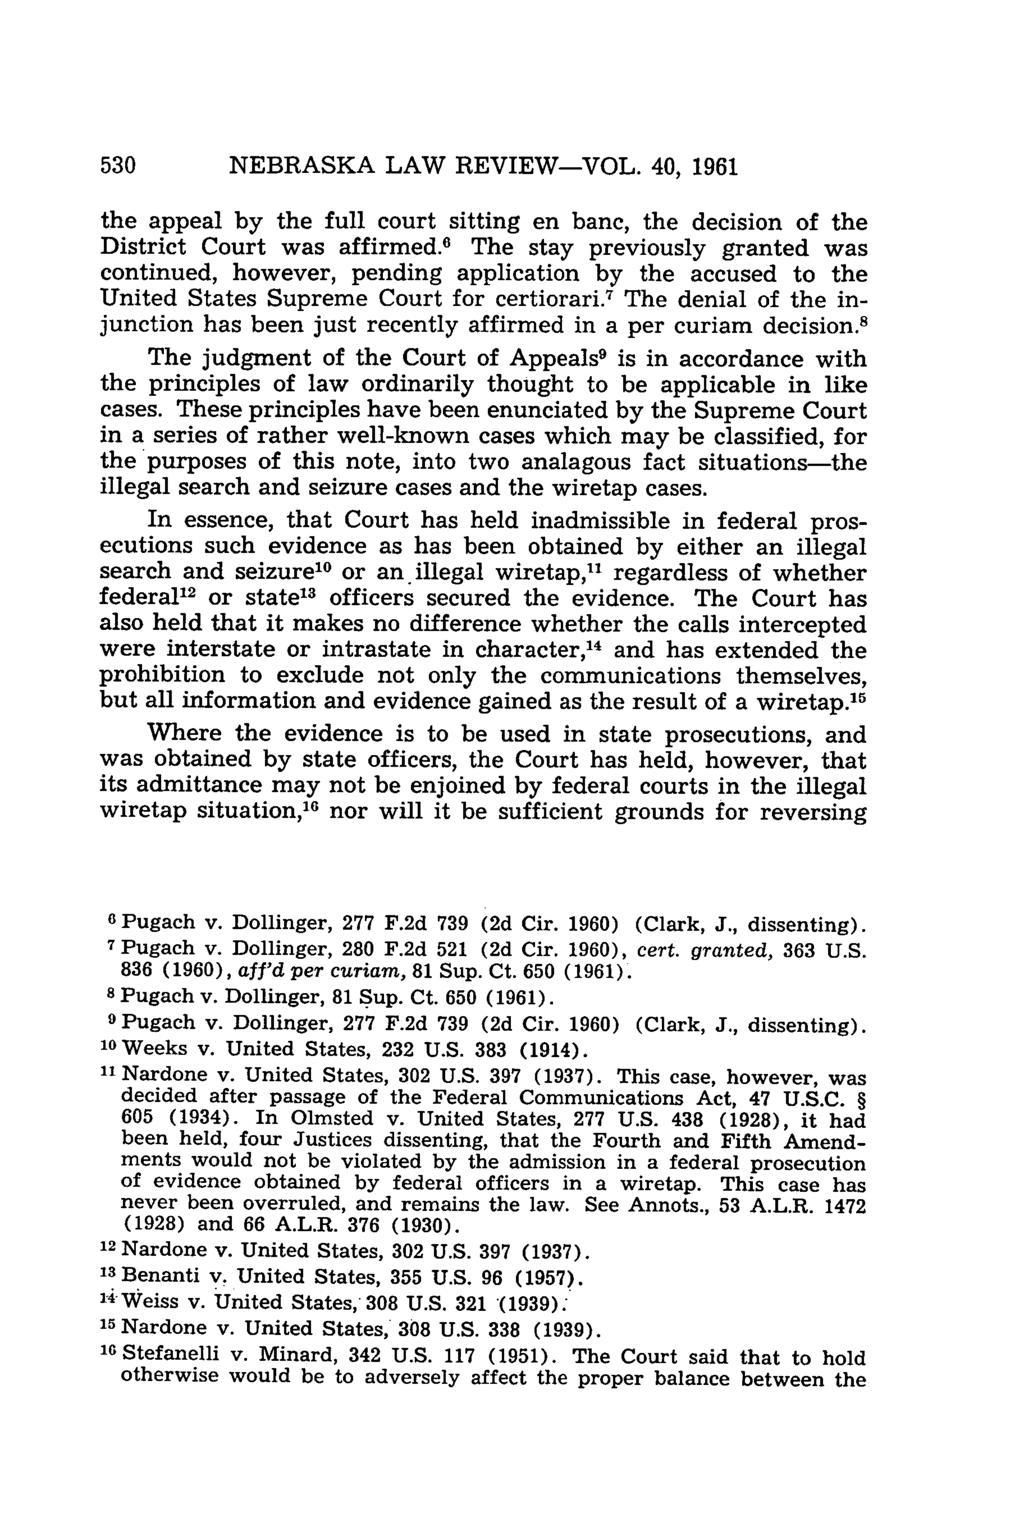 NEBRASKA LAW REVIEW-VOL. 40, 1961 the appeal by the full court sitting en banc, the decision of the District Court was affirmed.